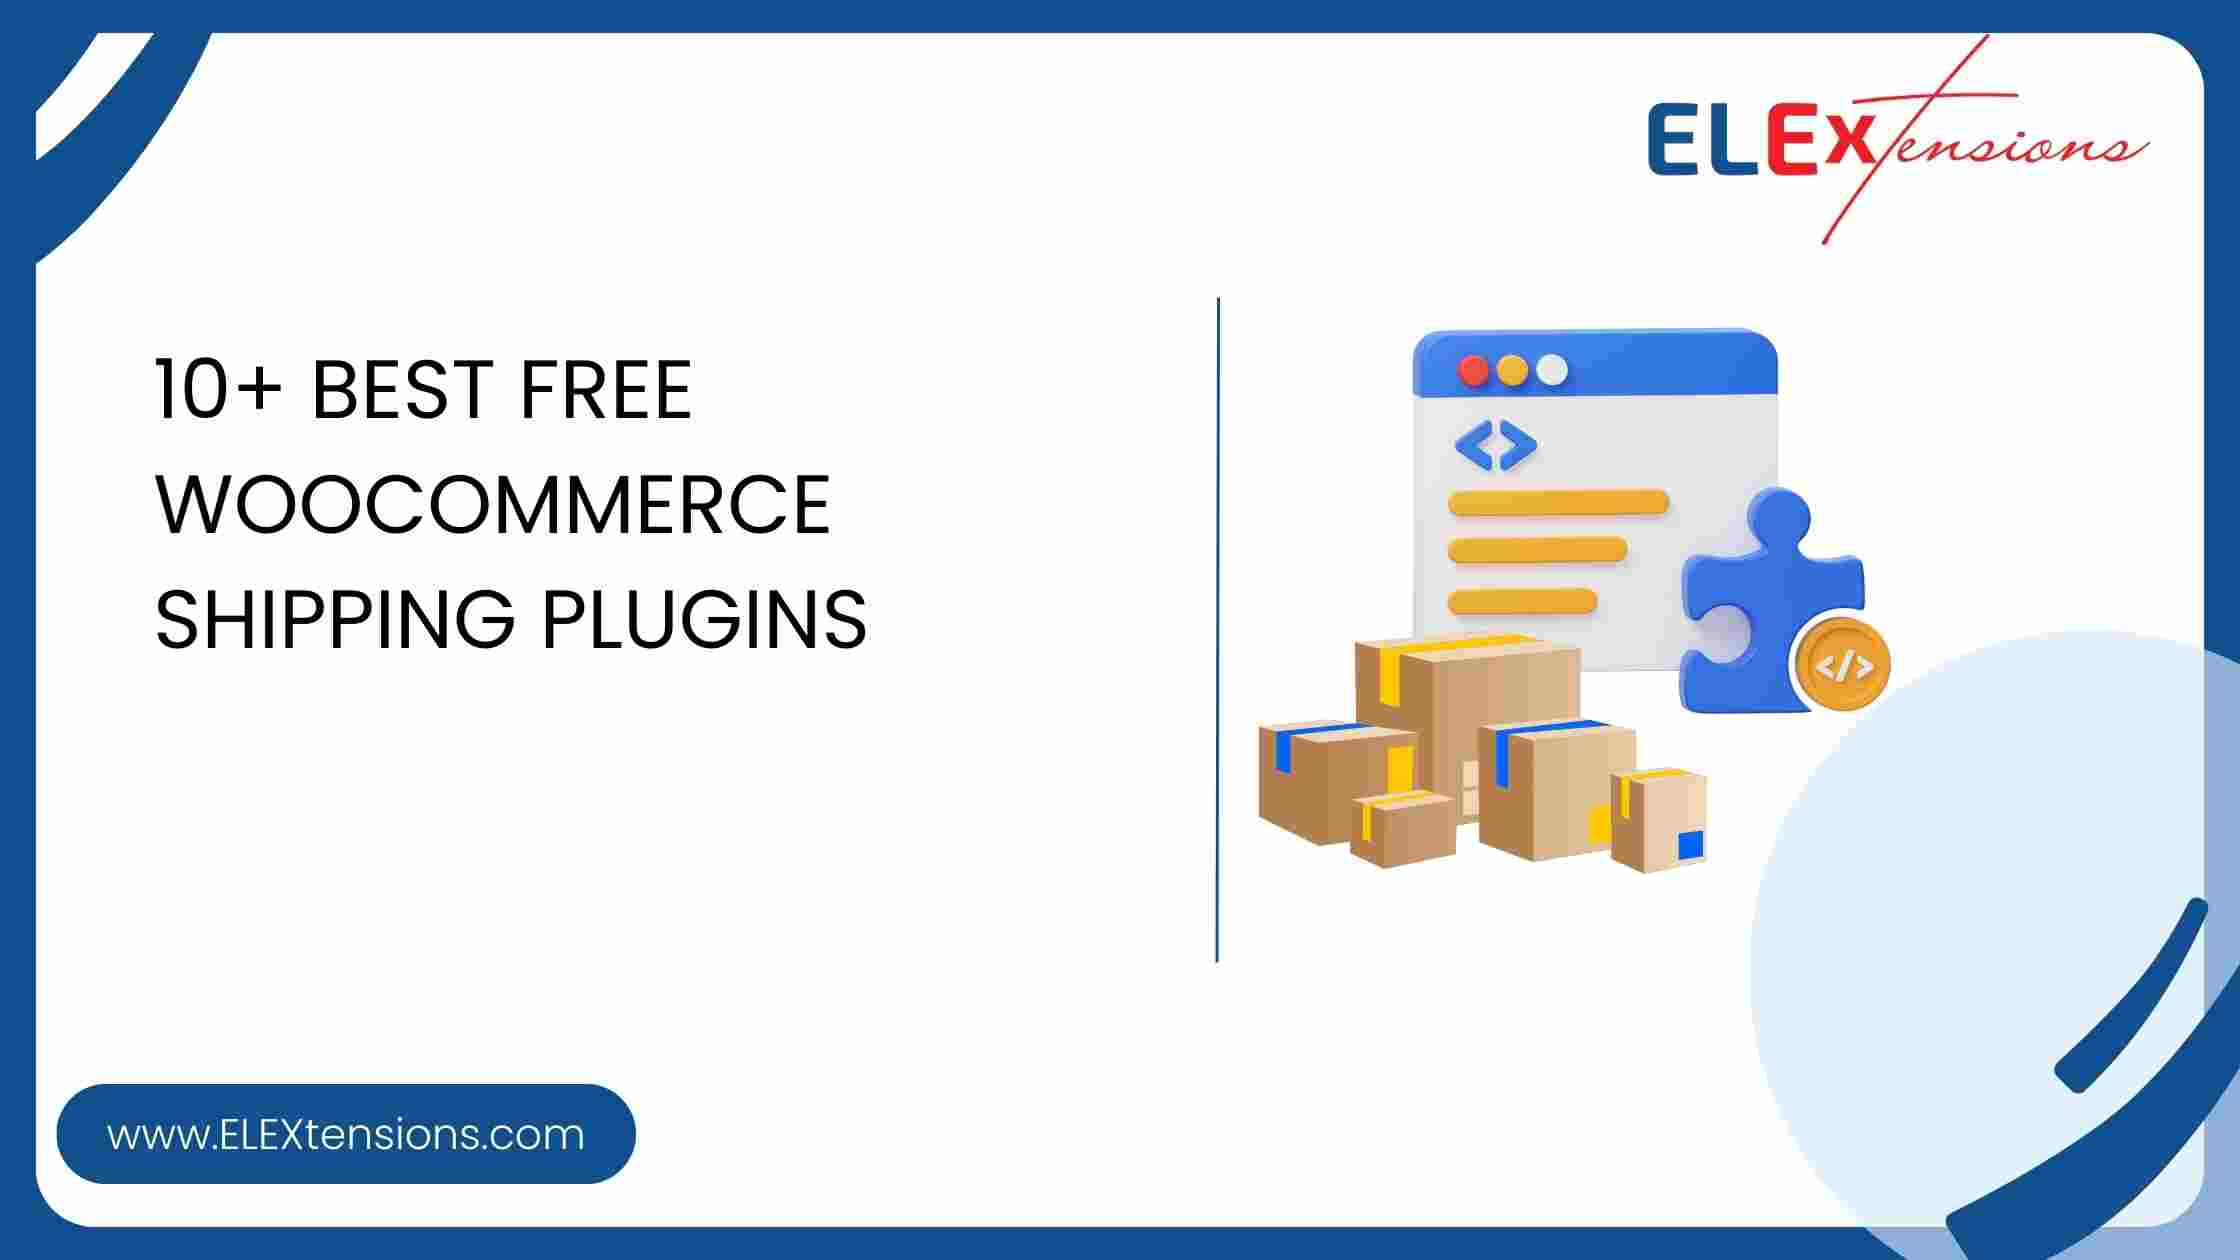 10+ Best Free WooCommerce Shipping Plugins